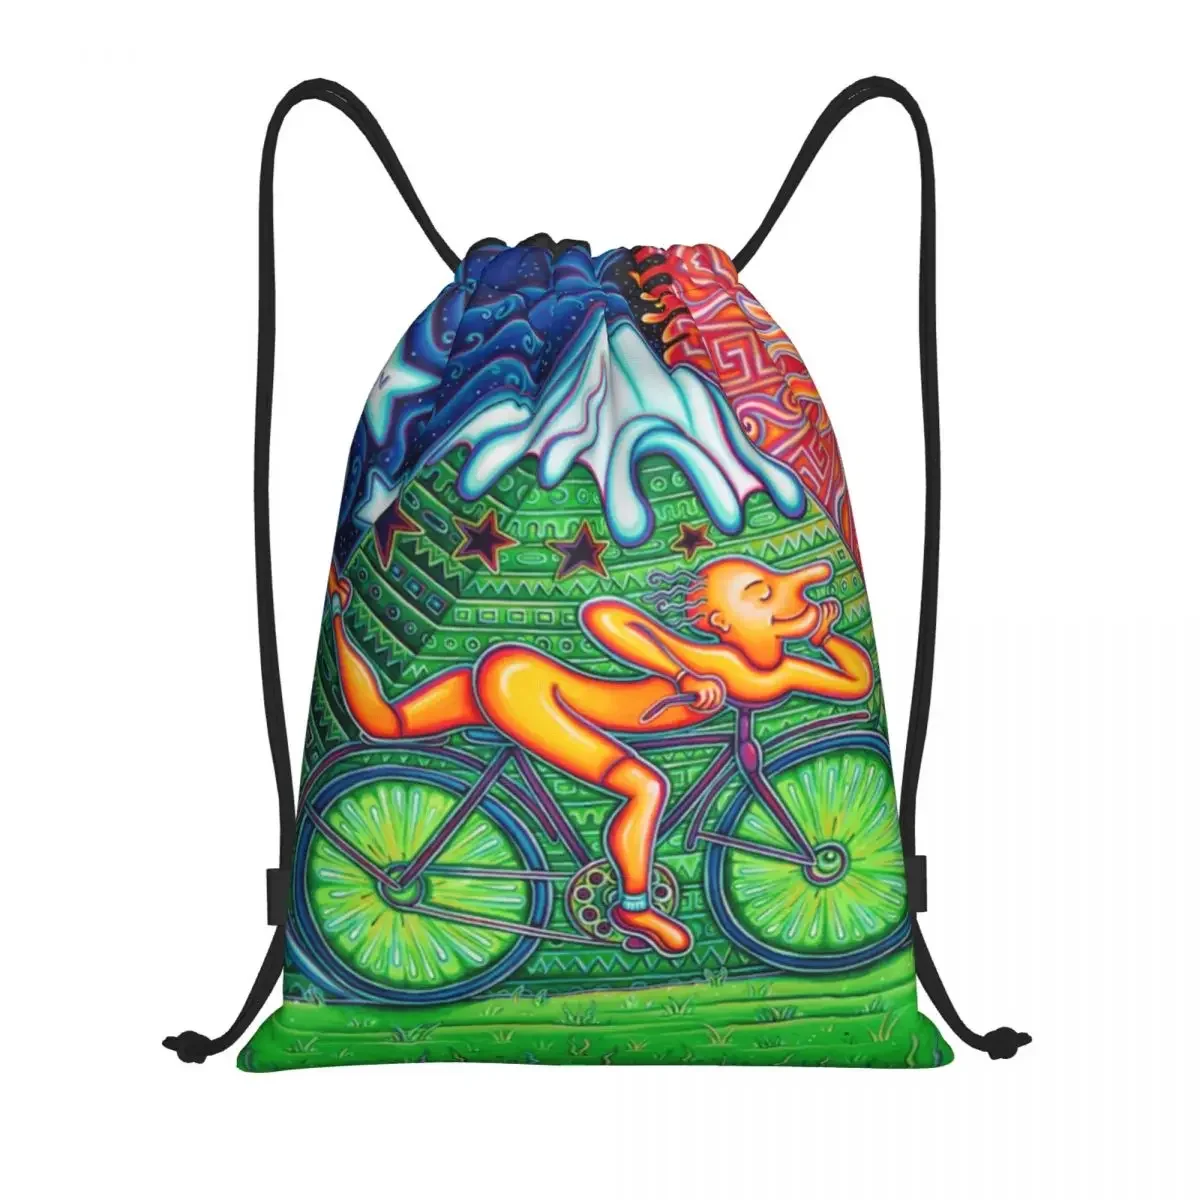 

Bicycle Day Albert Hoffman Drawstring Backpack Bags Lightweight Lsd Acid Blotter Party Gym Sports Sackpack Sacks for Shopping